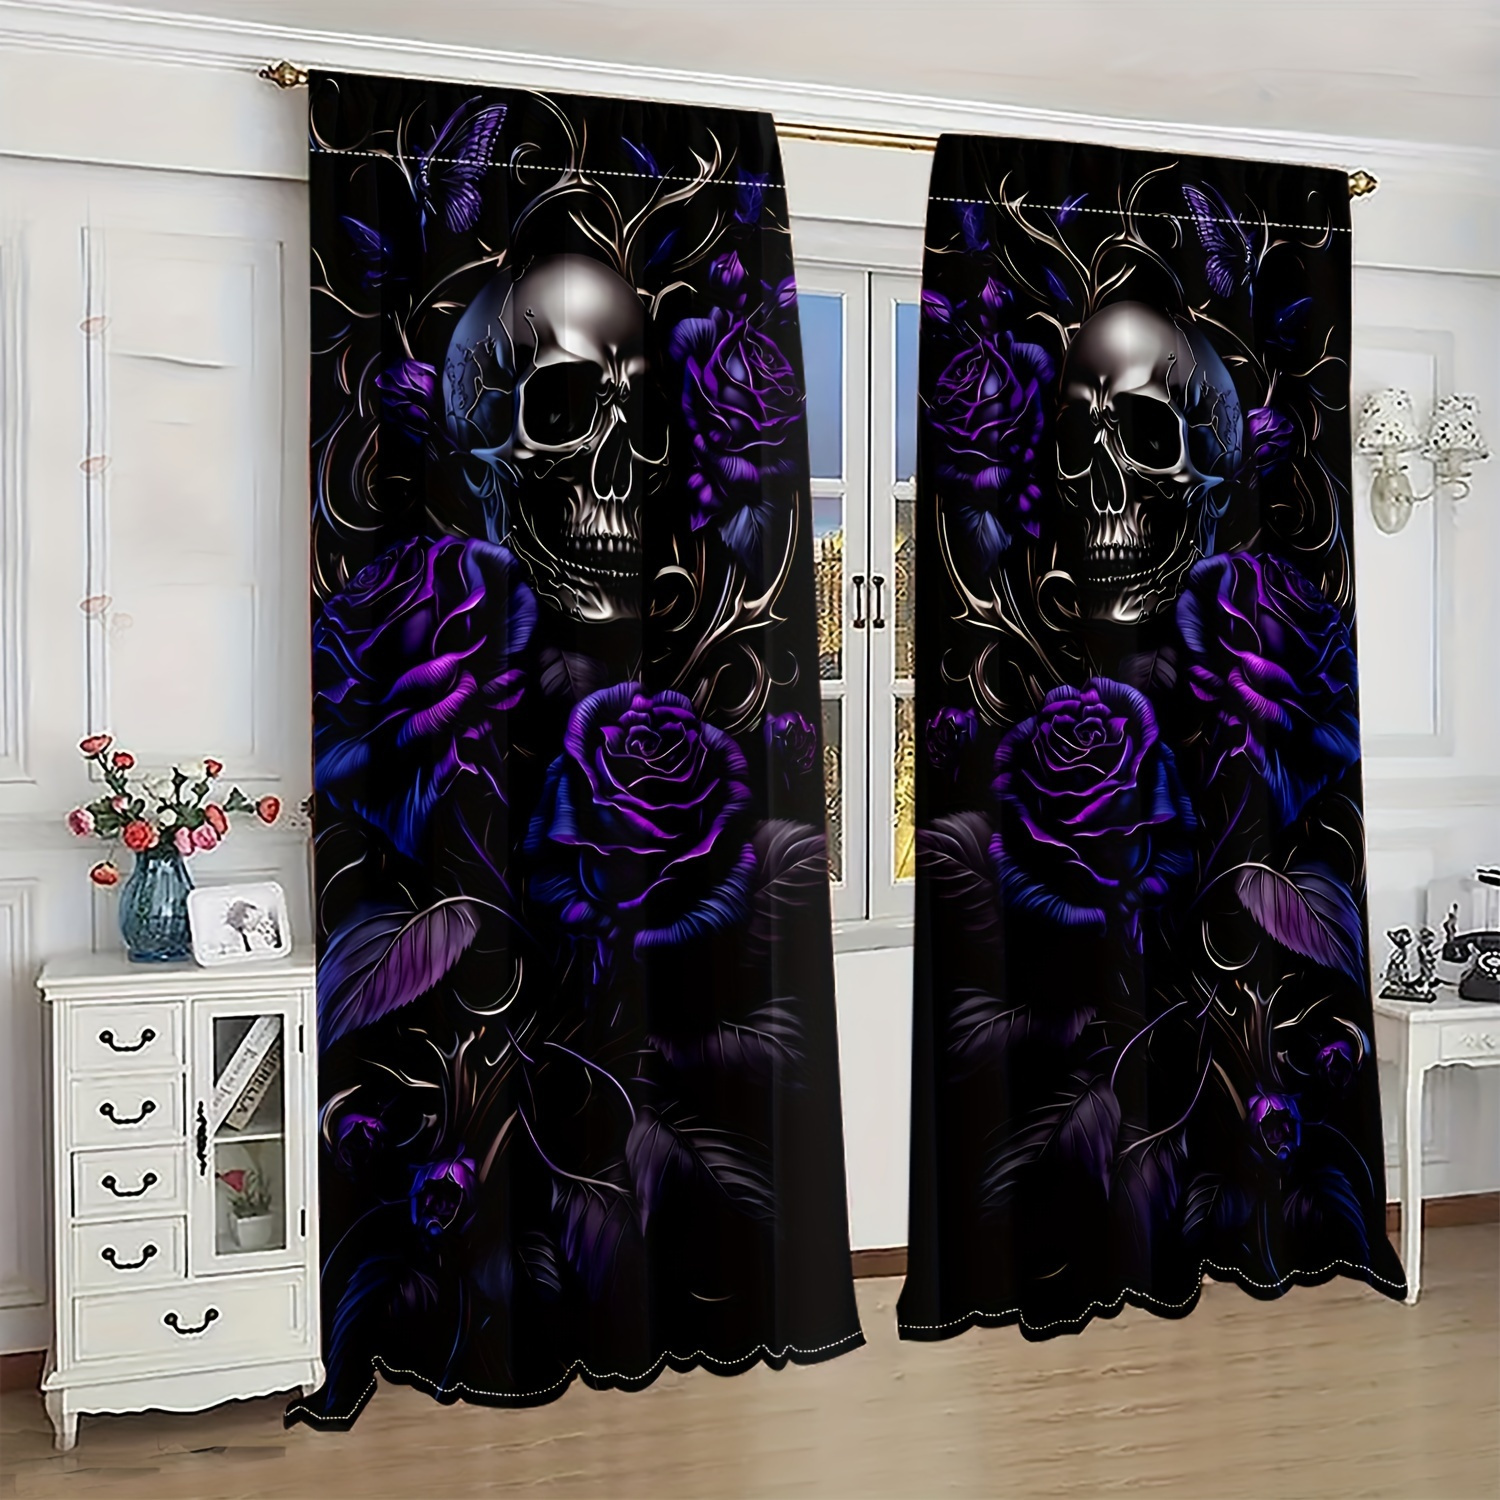 

2pcs Floral Prints Light Filtering Curtains, Semi-sheer Privacy Window Drapes Set, Decorative Window Treatments For Bedroom, Living Room, Balcony, Office, Dormitory, Bay Window, Decor, Home Decoration